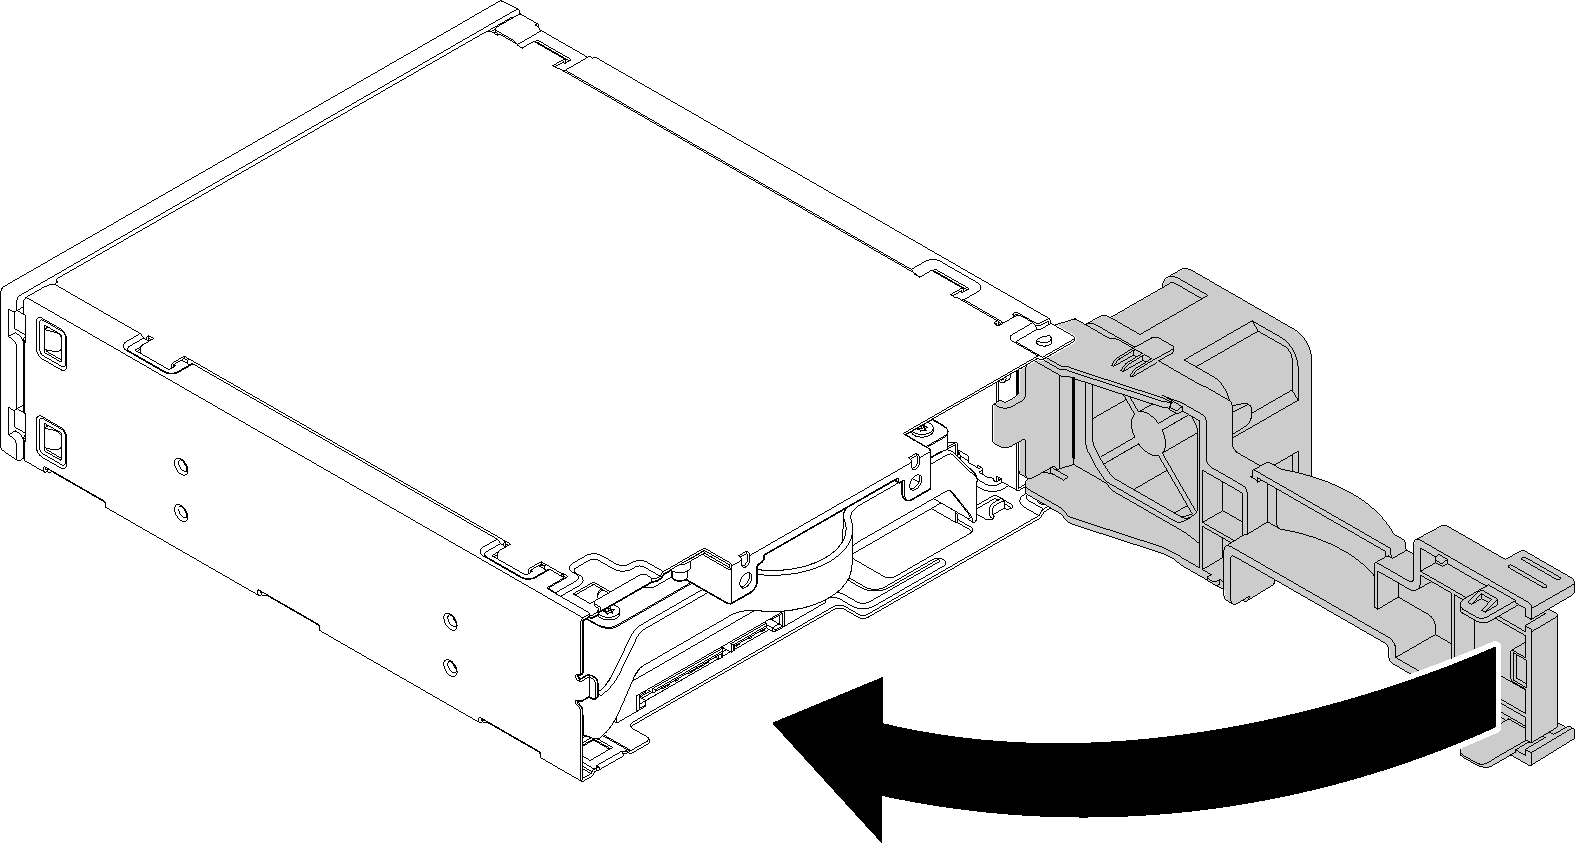 Closing the drive adapter latch